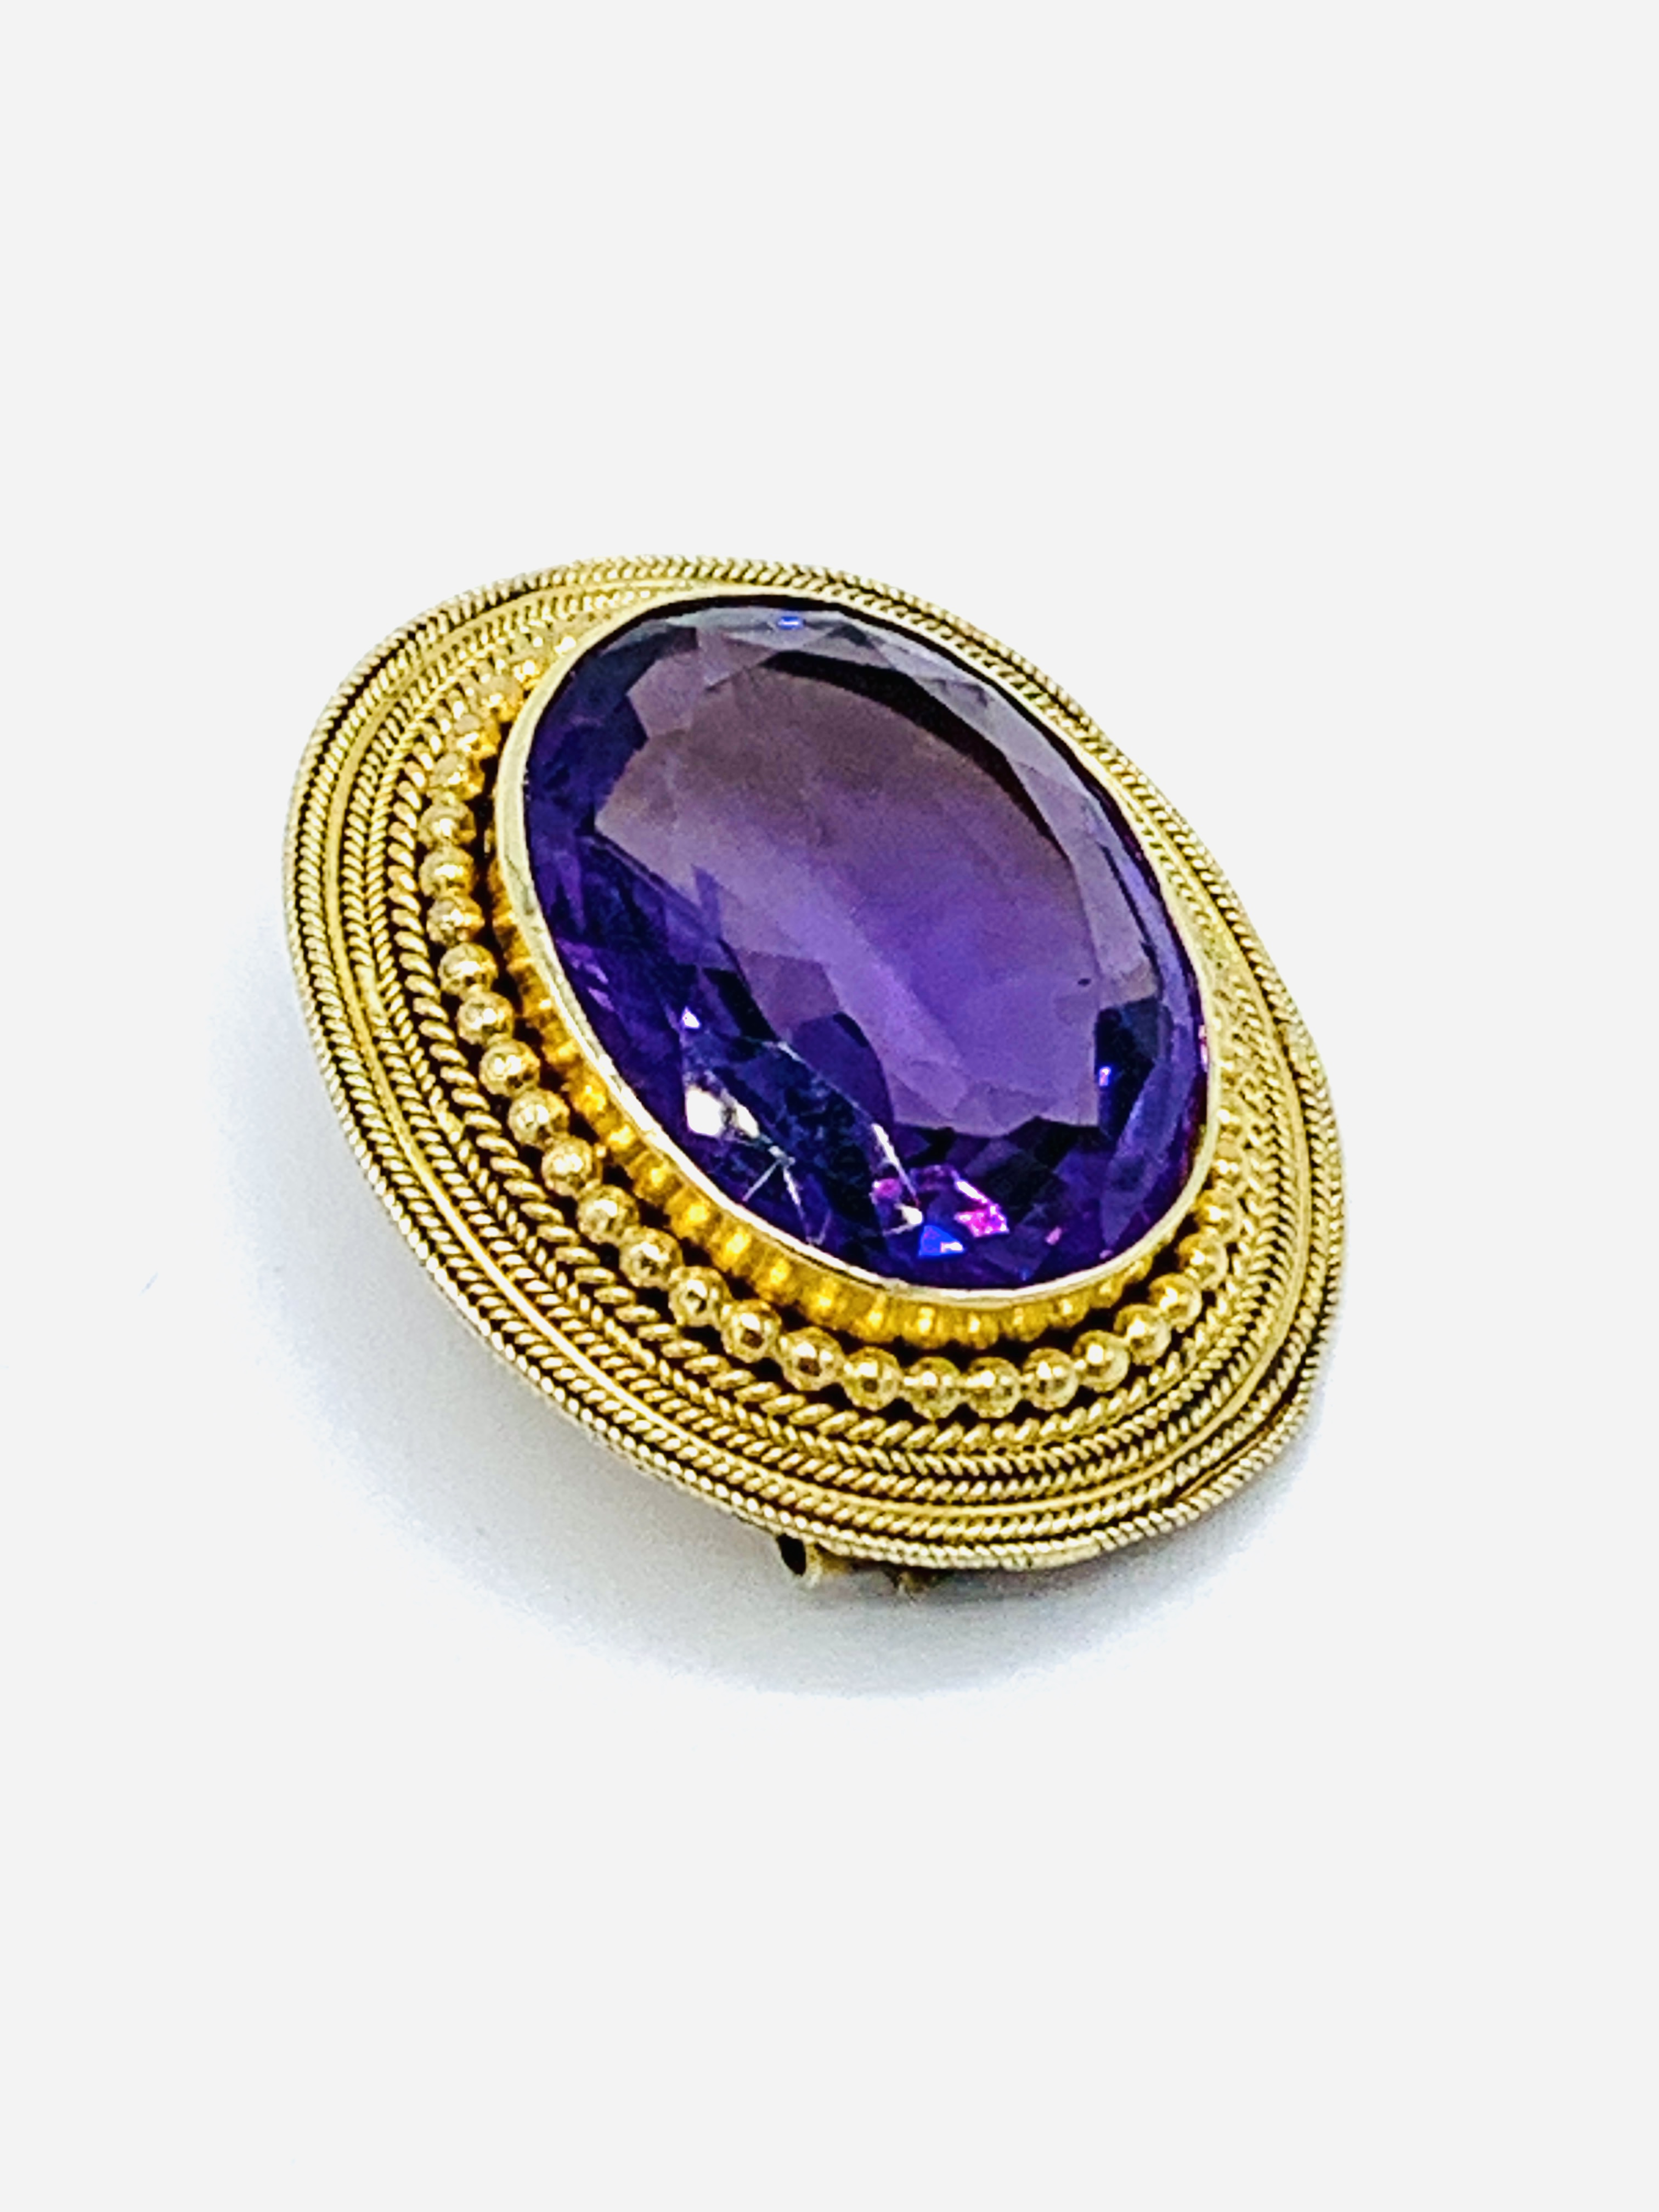 Late 19th century 14ct gold mounted amethyst brooch. - Image 2 of 3